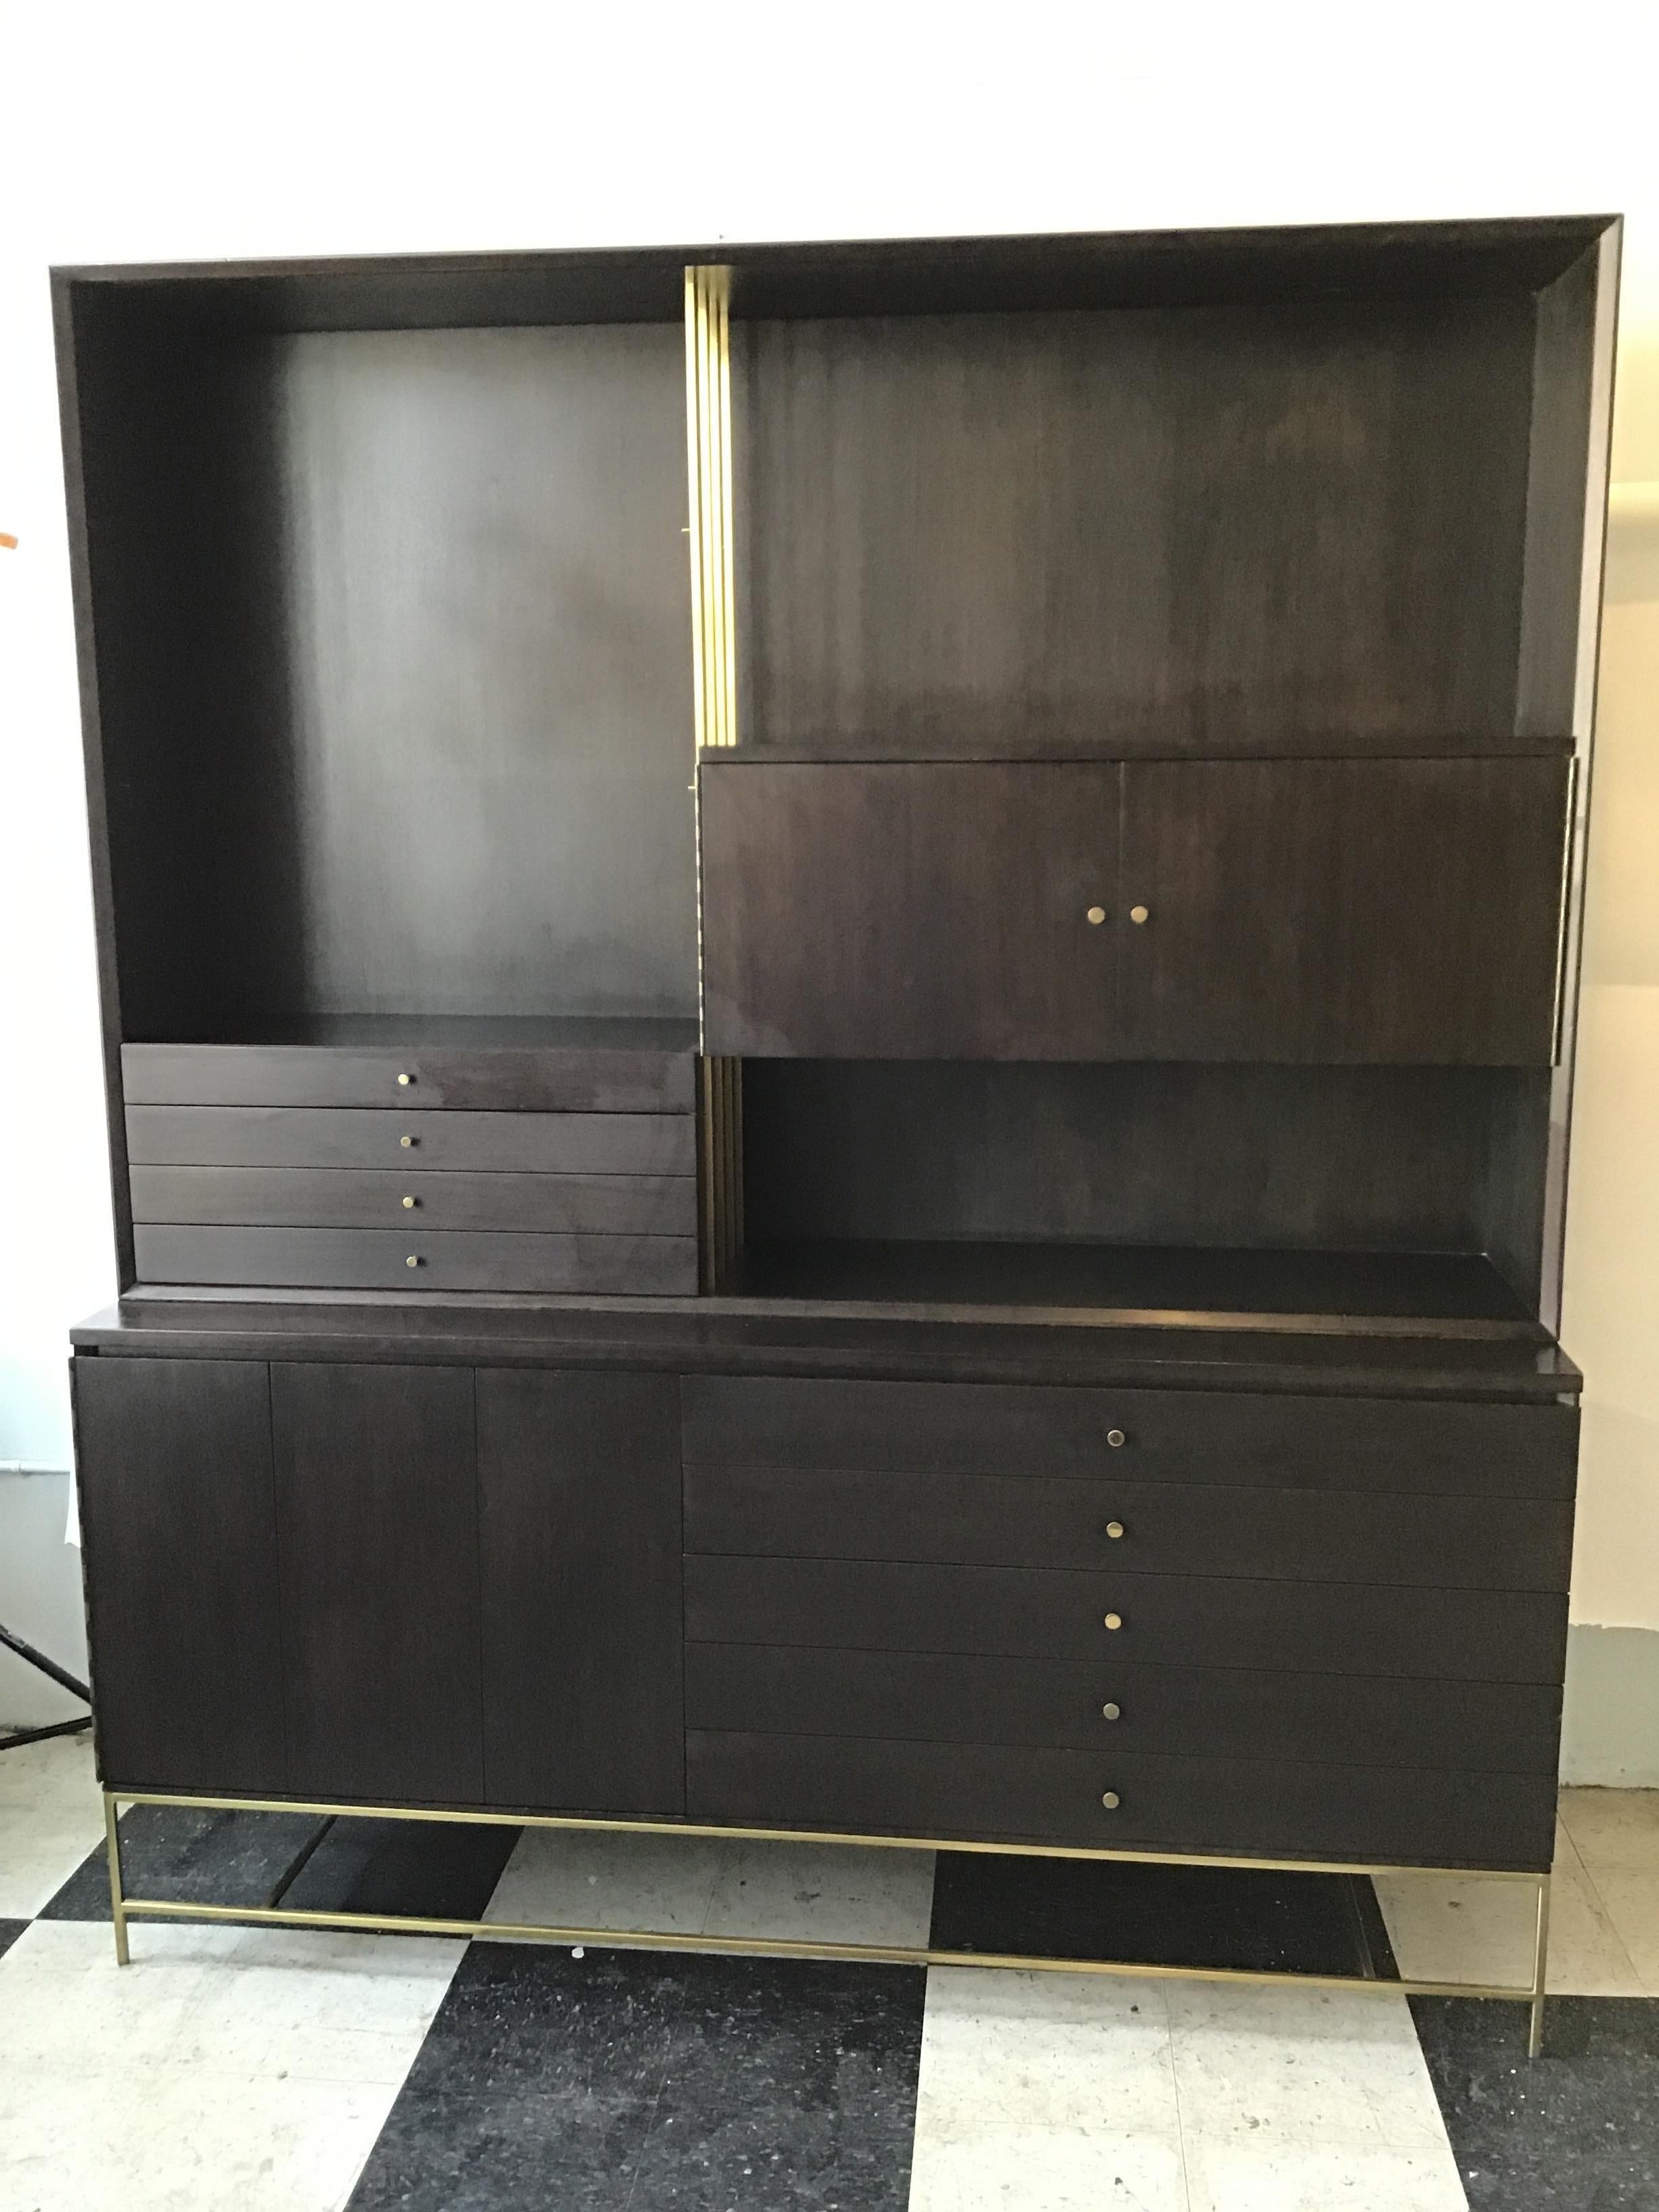 1960s Paul McCobb for Calvin wall unit. Purchased from a NYC estate. The piece was refinished 8 years ago. Comes with two glass shelves, not pictured.